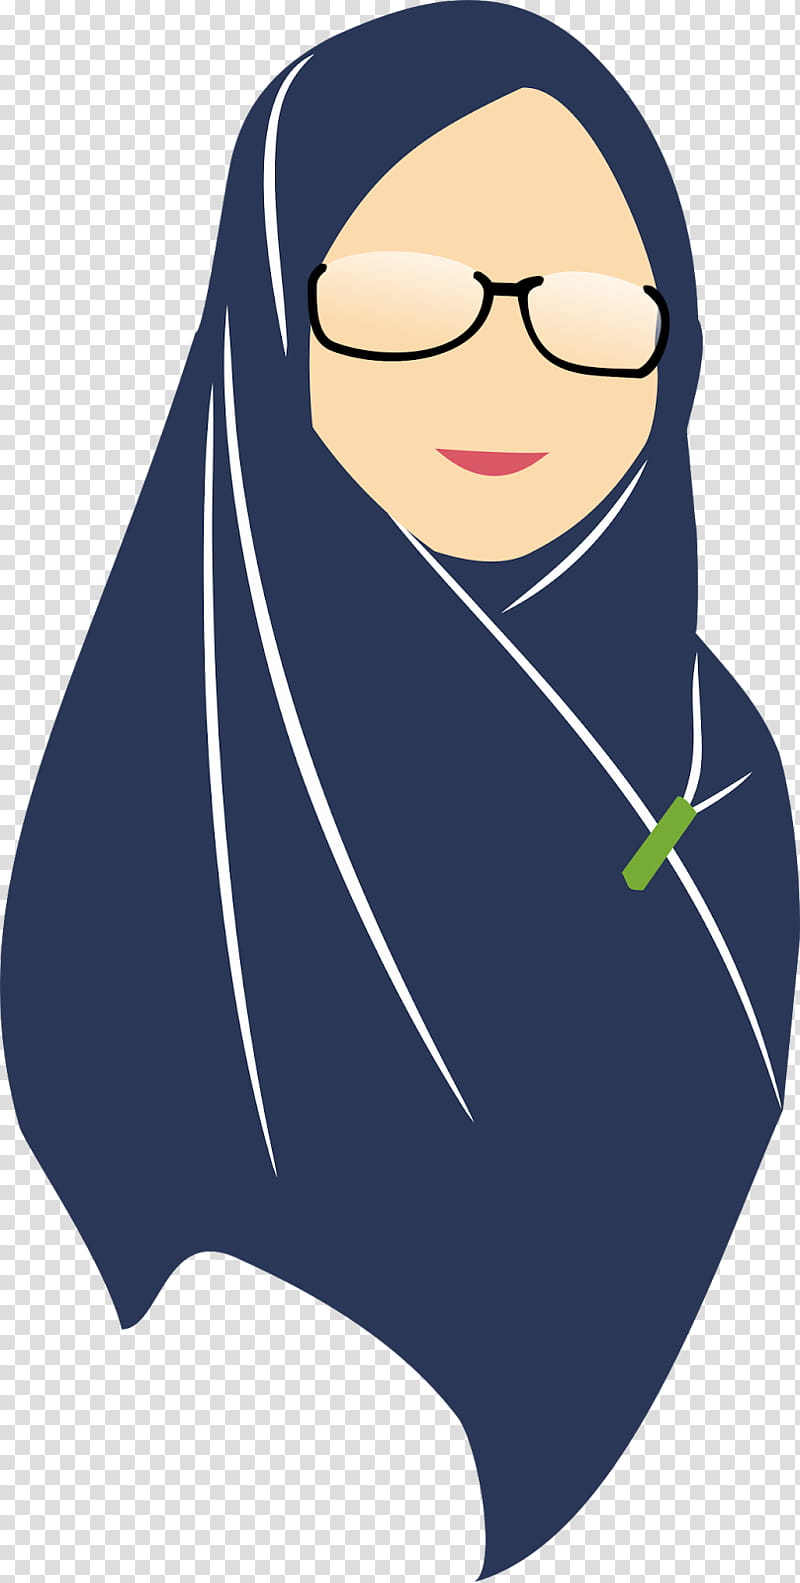 Hijab, Woman, Cartoon, Headscarf, Muslim, Women In Islam, Face, Nose transparent background PNG clipart